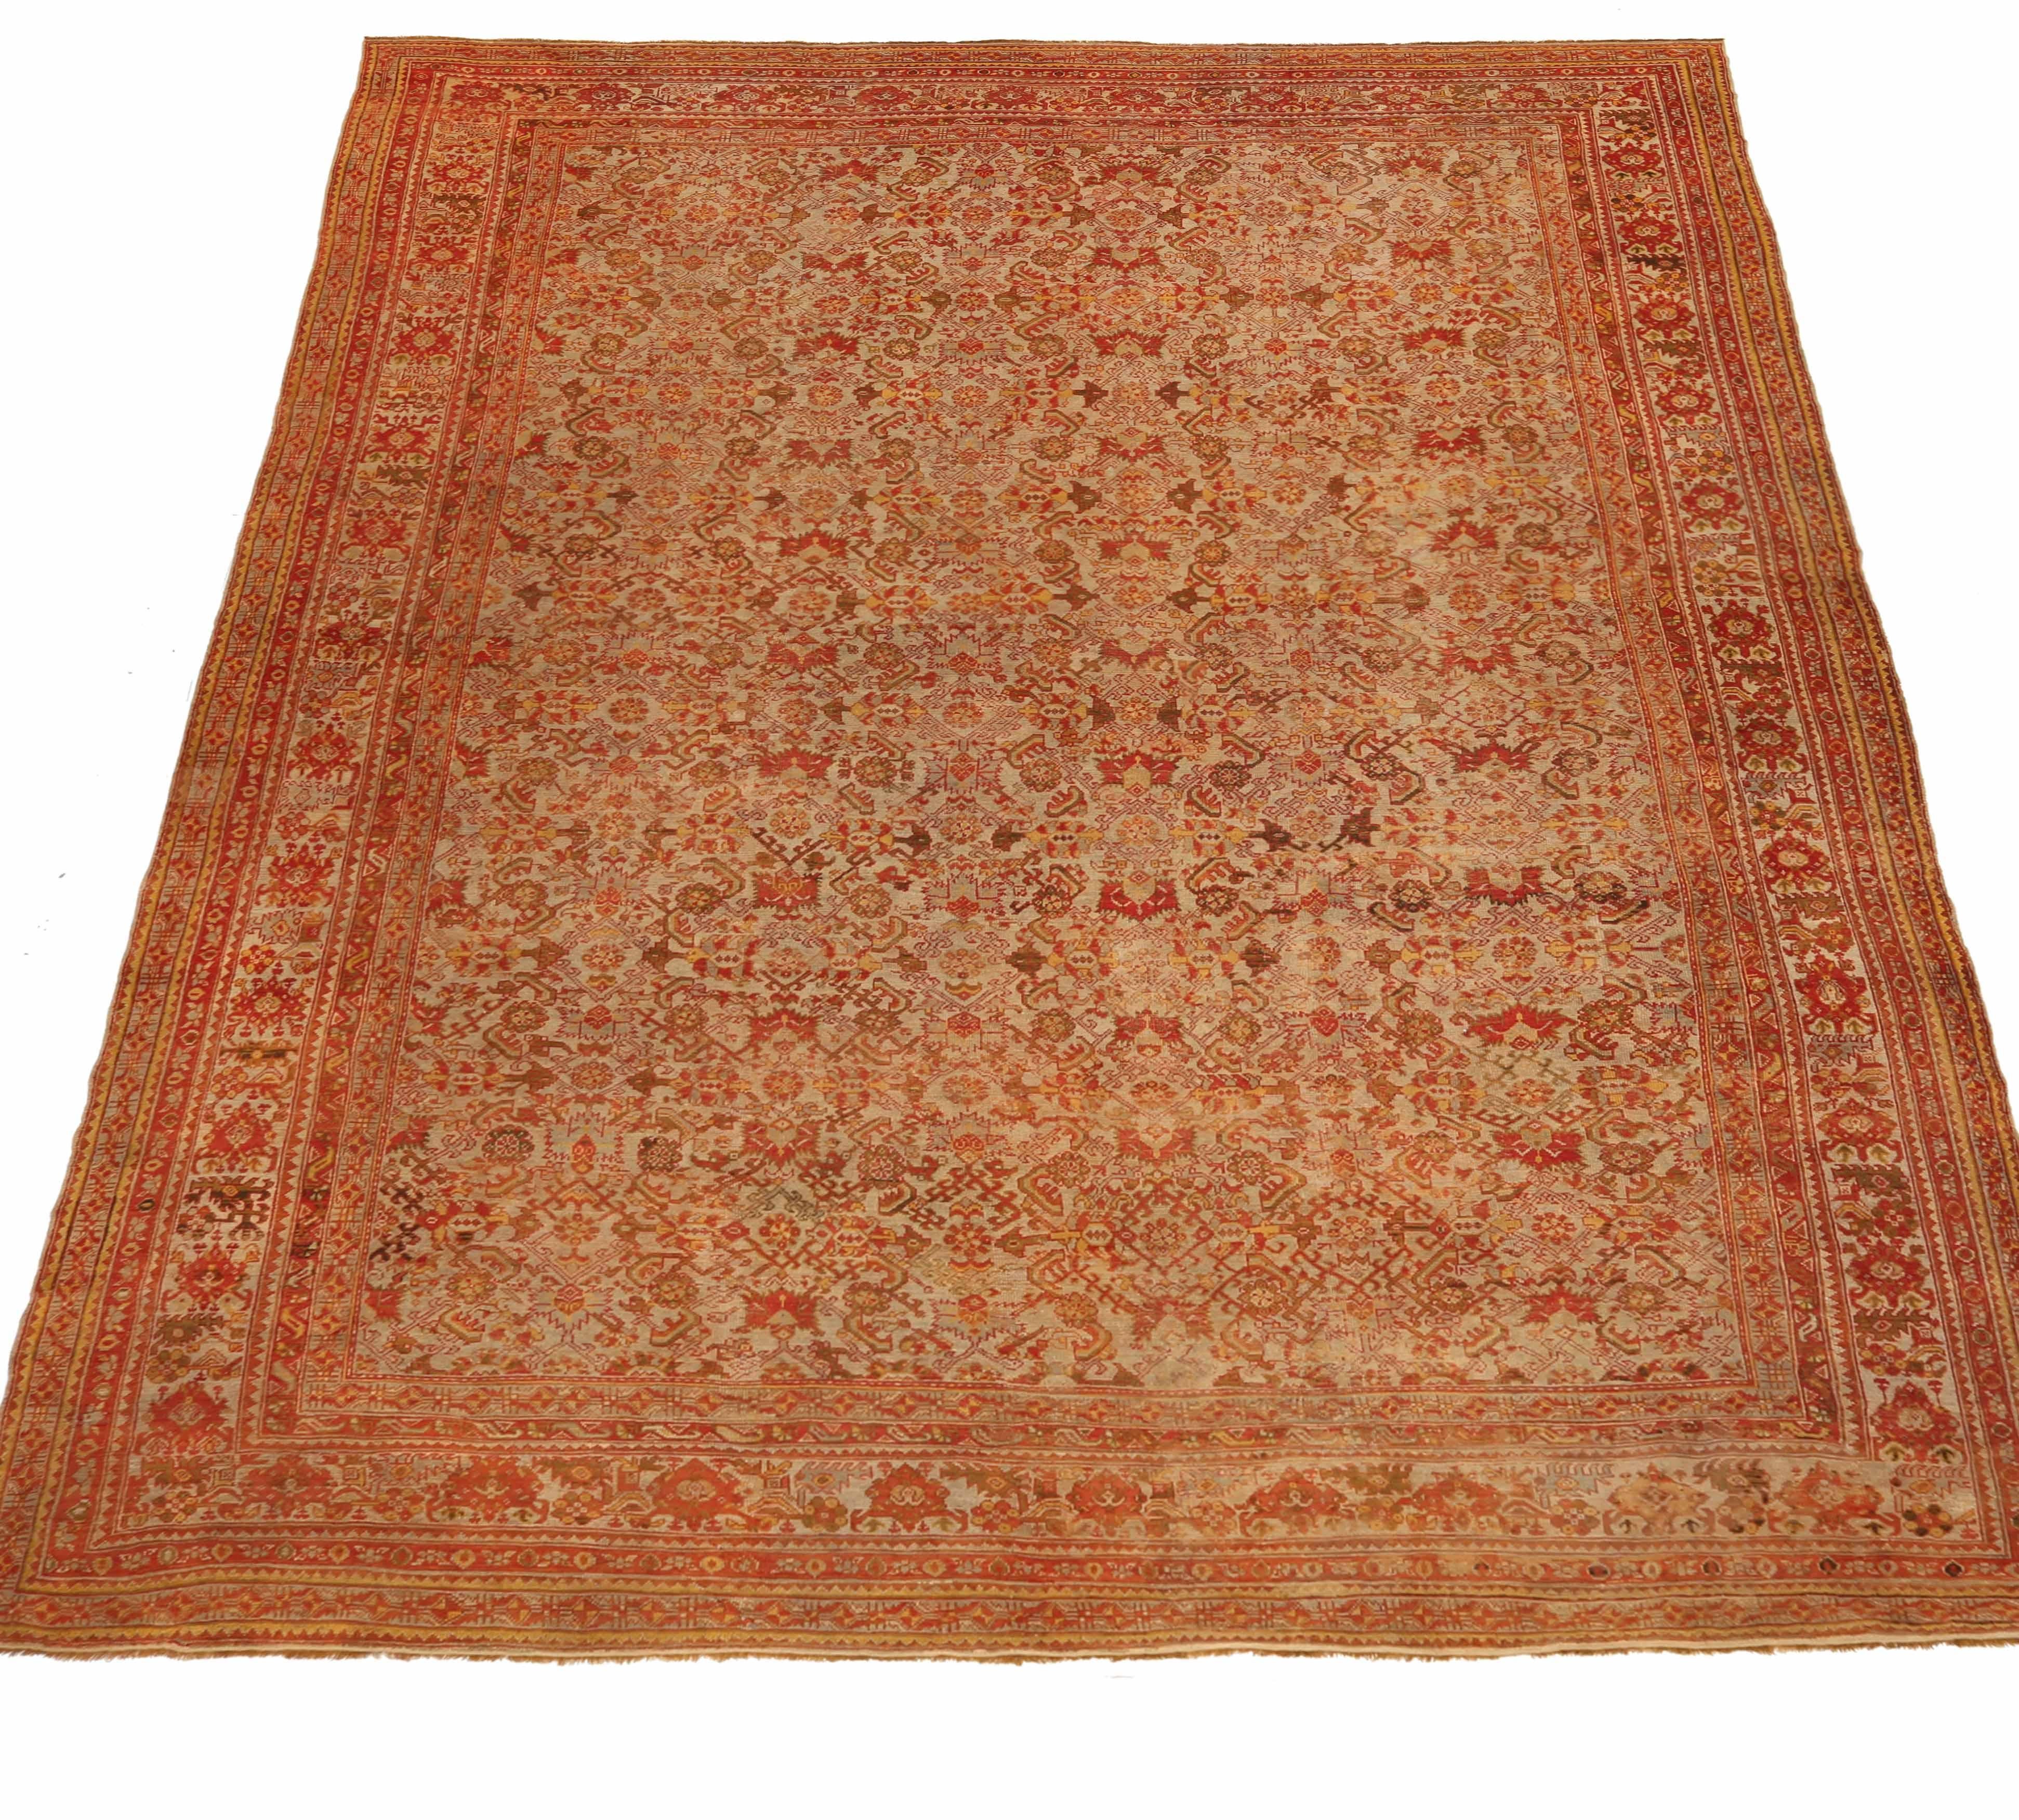 Oversize antique Turkish rug handwoven from the finest sheep’s wool. It’s colored with all-natural vegetable dyes that are safe for humans and pets. It’s a traditional Oushak design handwoven by expert artisans.It’s a lovely area rug that can be